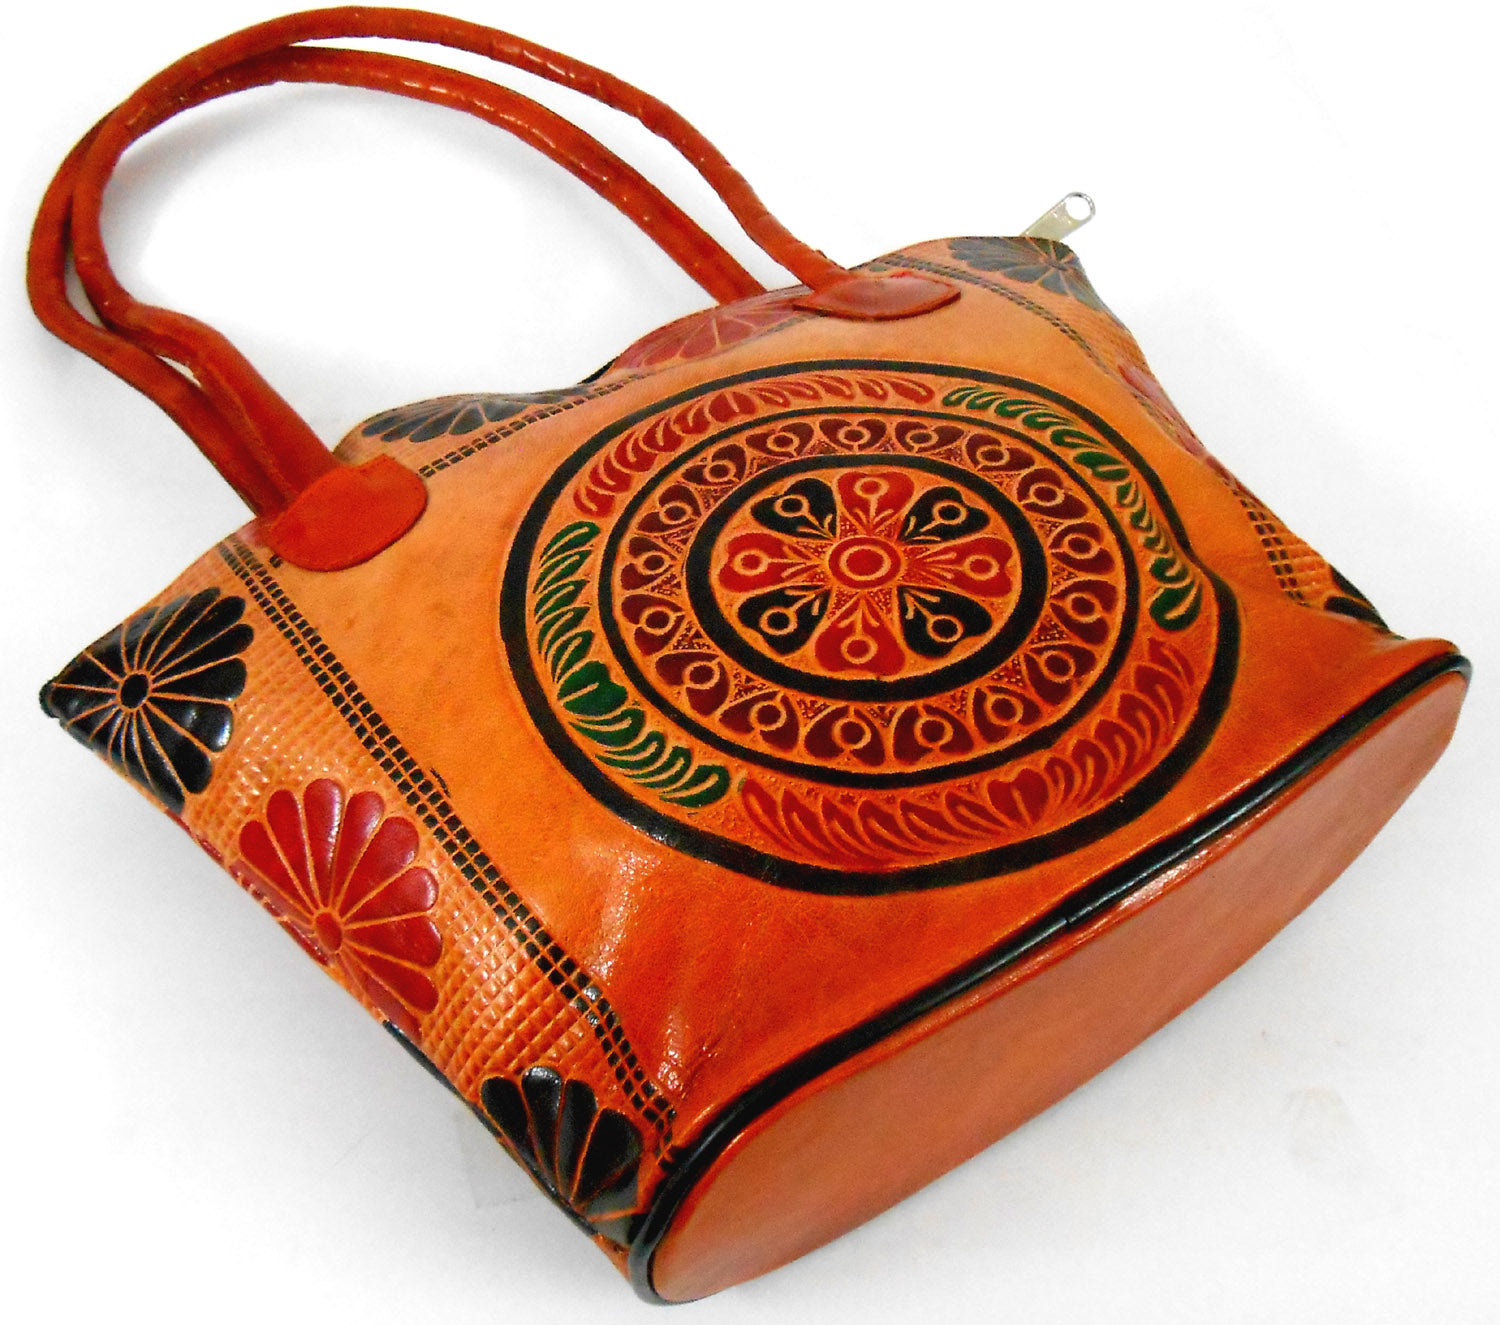 Hand Painted Leather Bag in Kolkata at best price by Shankar Produce Co Pvt  Ltd - Justdial